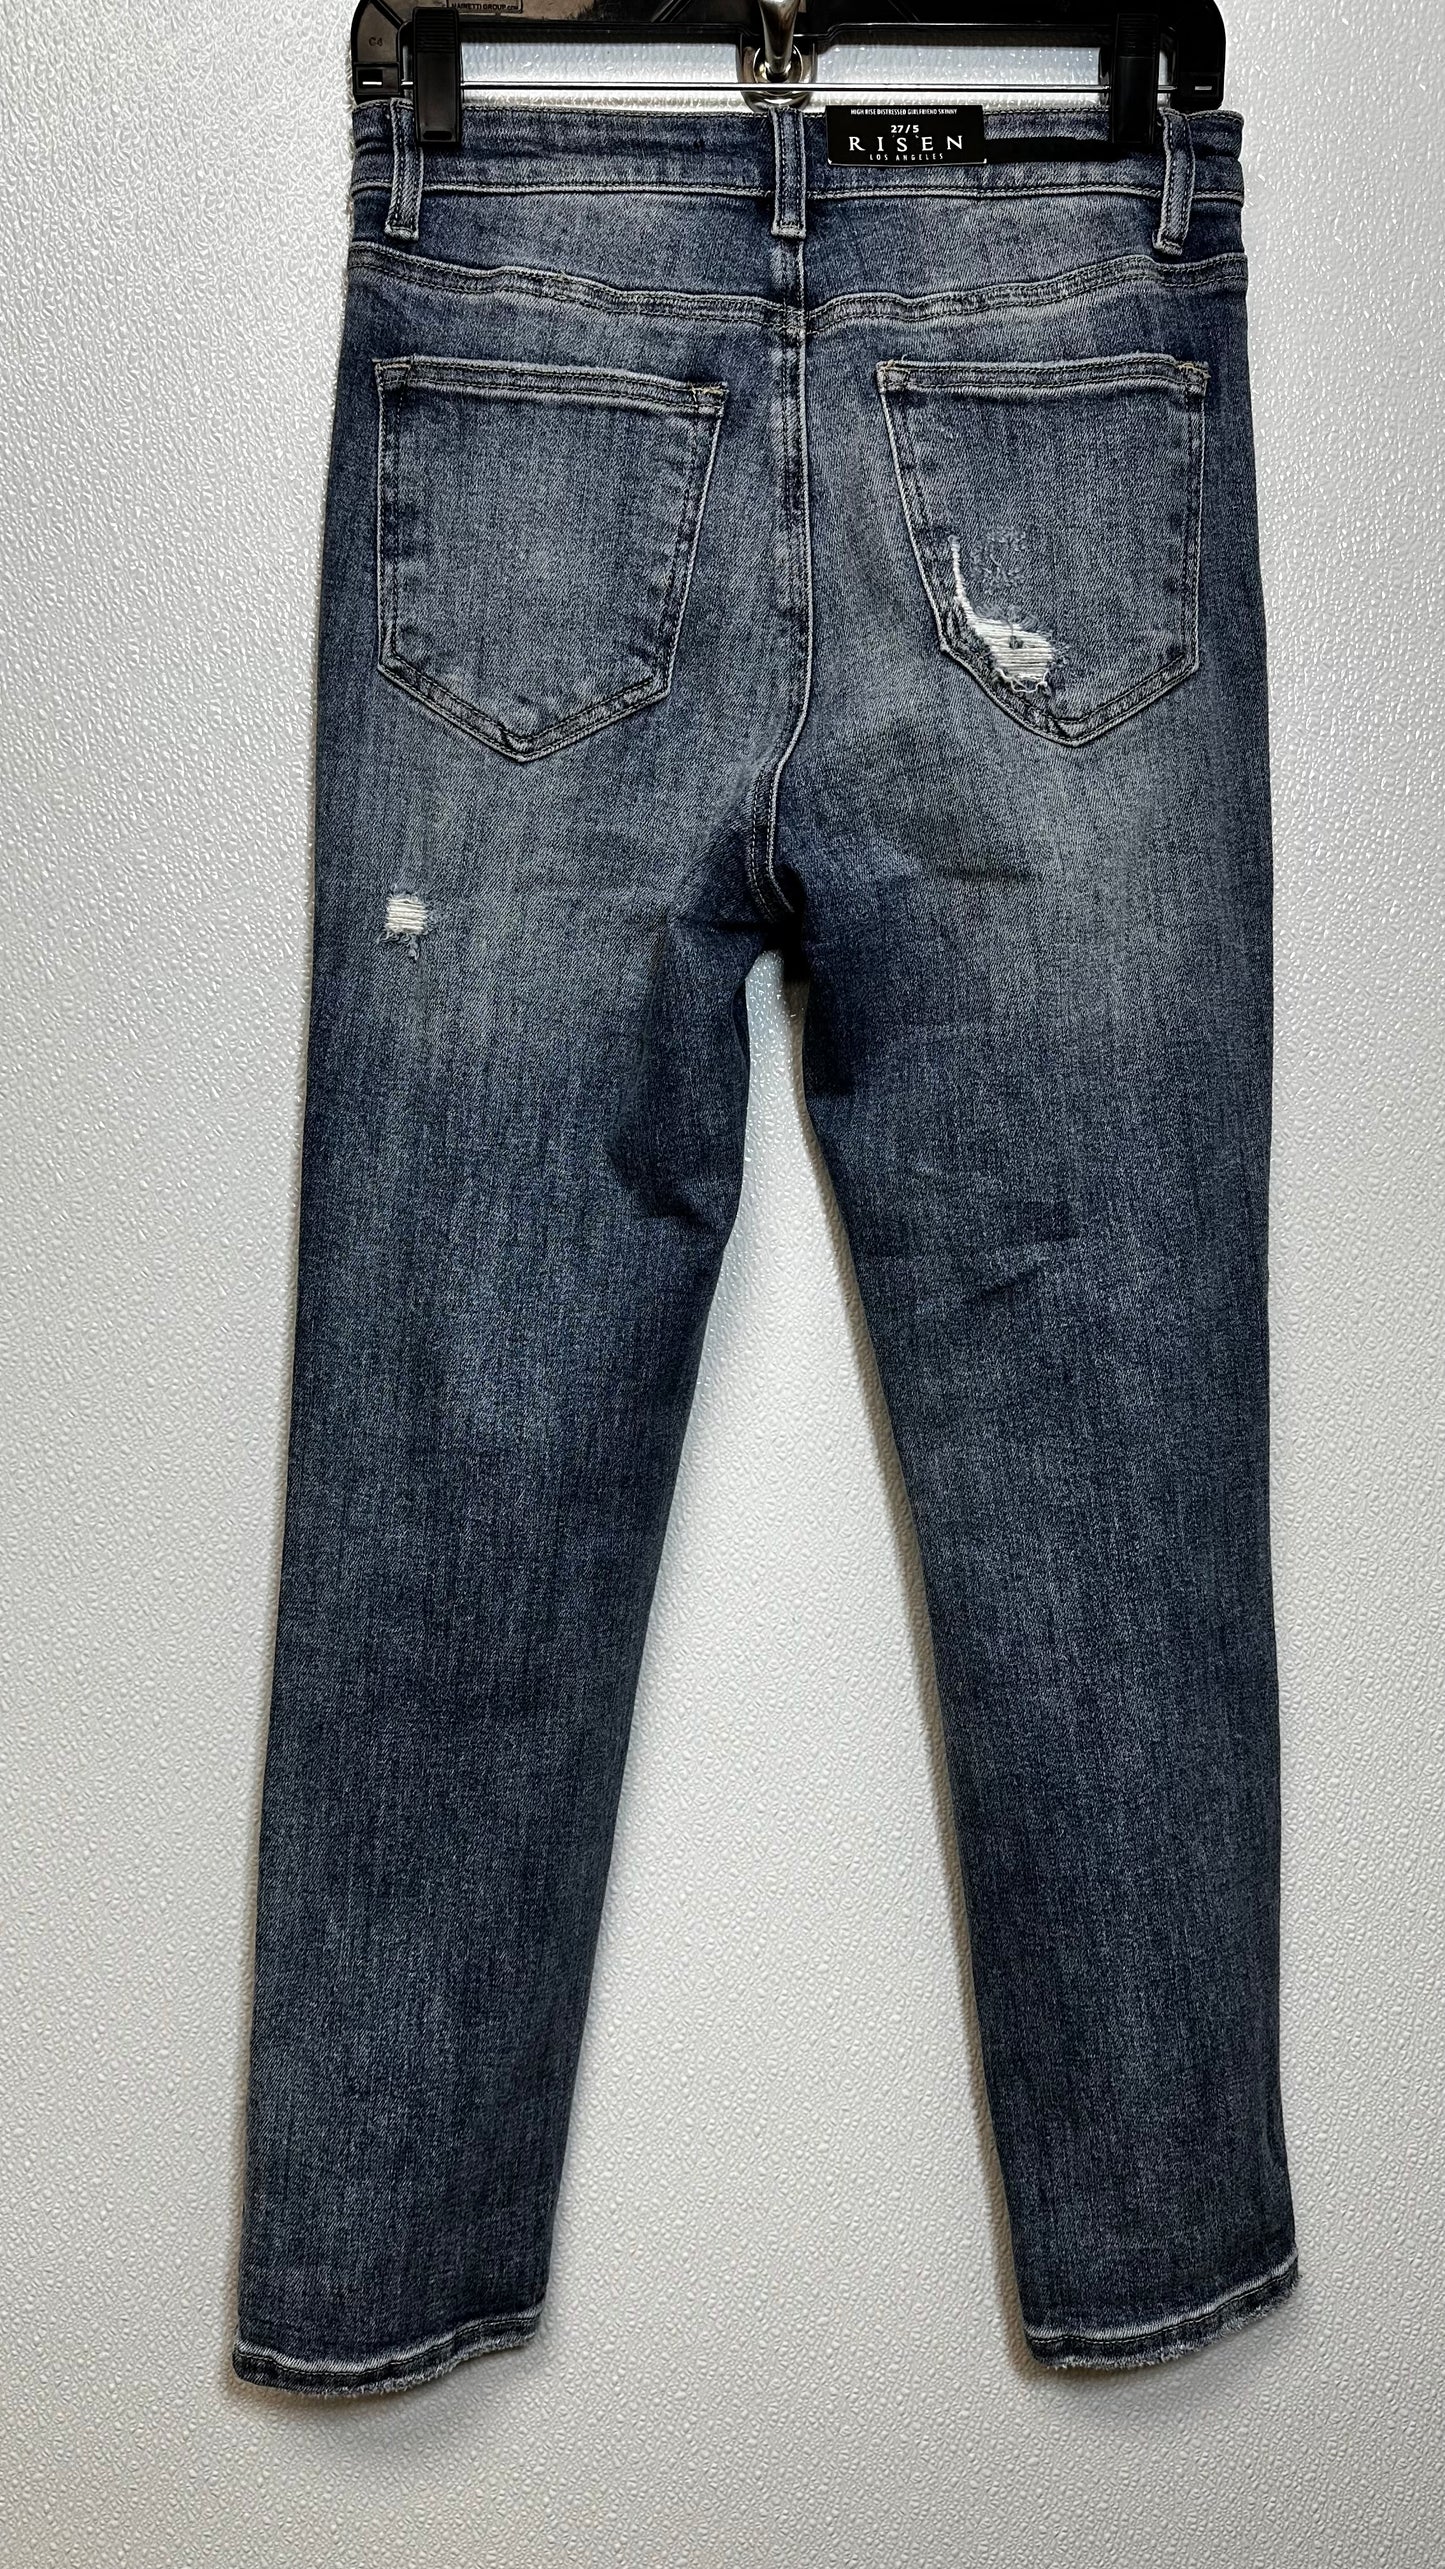 Jeans Relaxed/boyfriend Clothes Mentor, Size 5